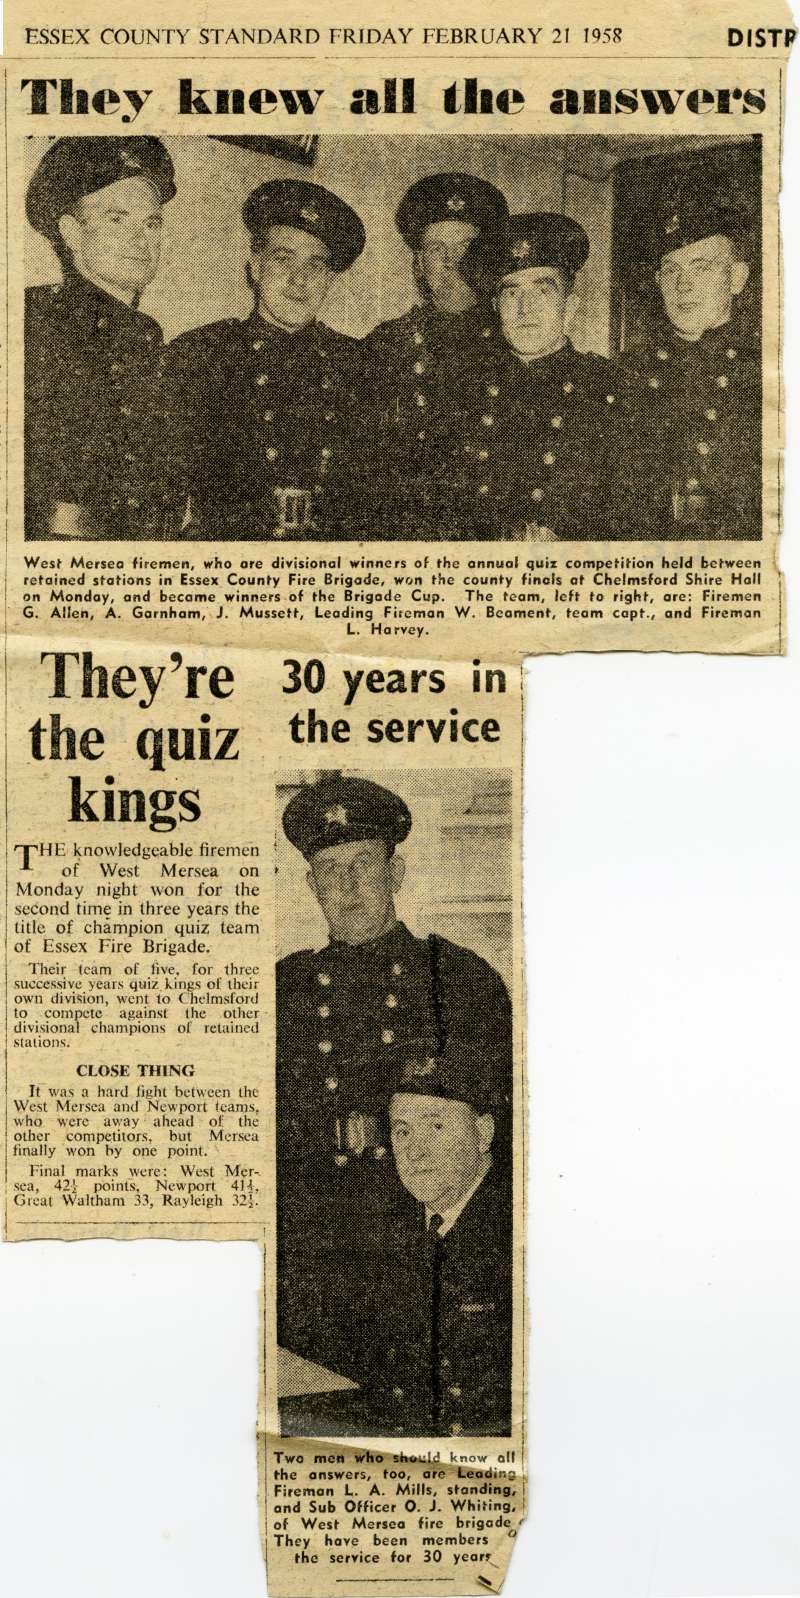  West Mersea firemen are quiz champions. Photographs G. Allen, A. Garnham, J. Mussett, W. Beament and L. Harvey. Second picture has L.A. Mills and O.J. Whiting.

from Essex County Standard 21 February 1958 
Cat1 Mersea-->Fire Brigade Cat2 Families-->Mussett